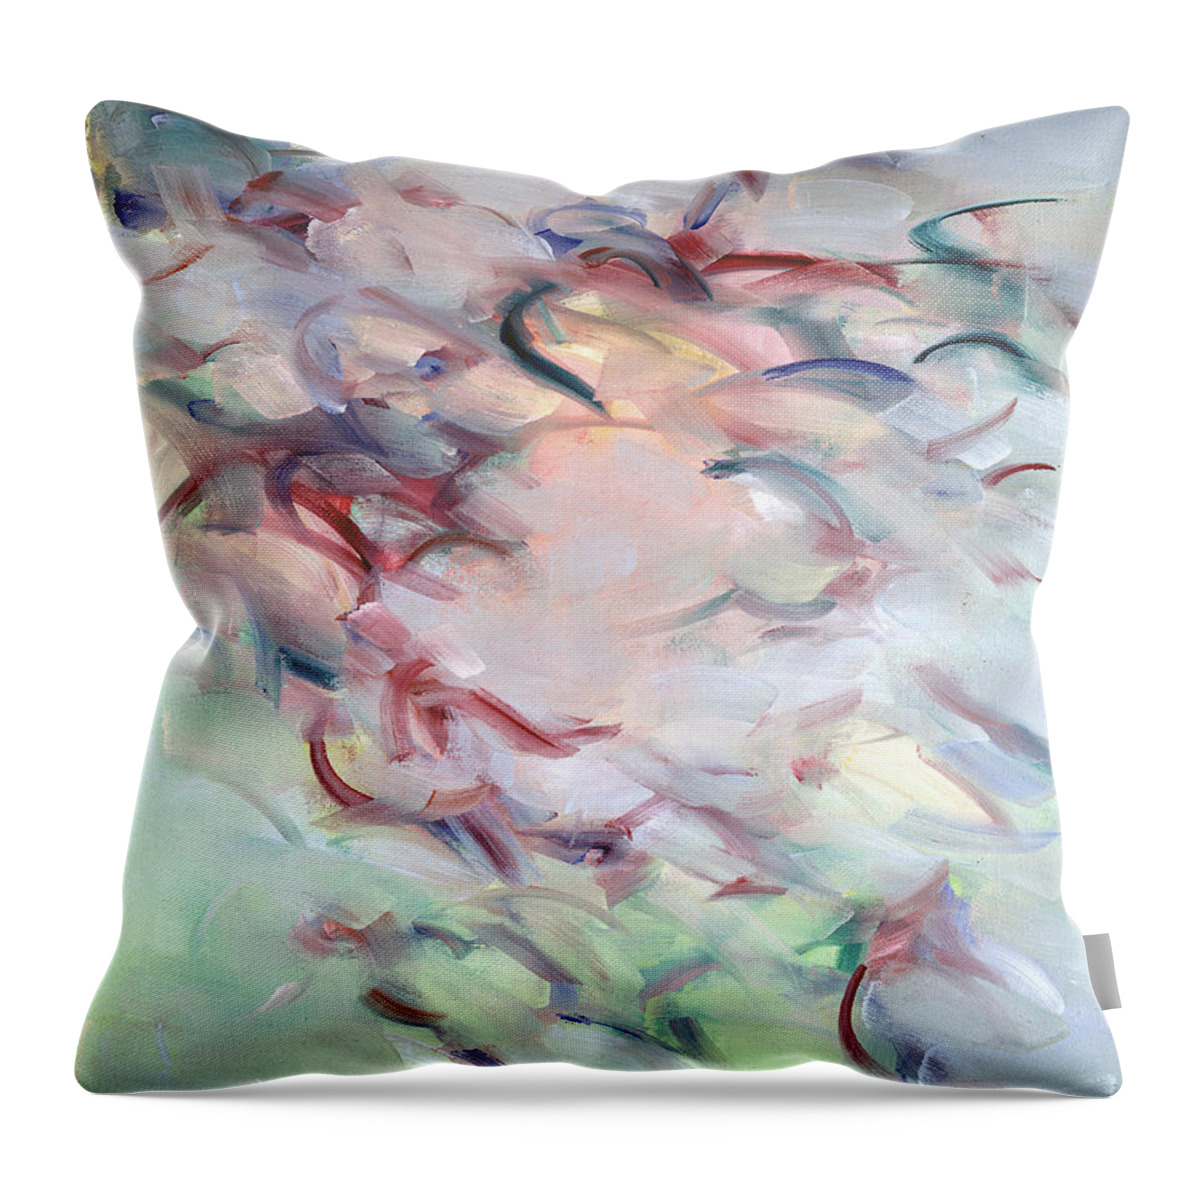 Abstraction Throw Pillow featuring the painting Gethsemane Mt 26-44 - Calices by Ritchard Rodriguez